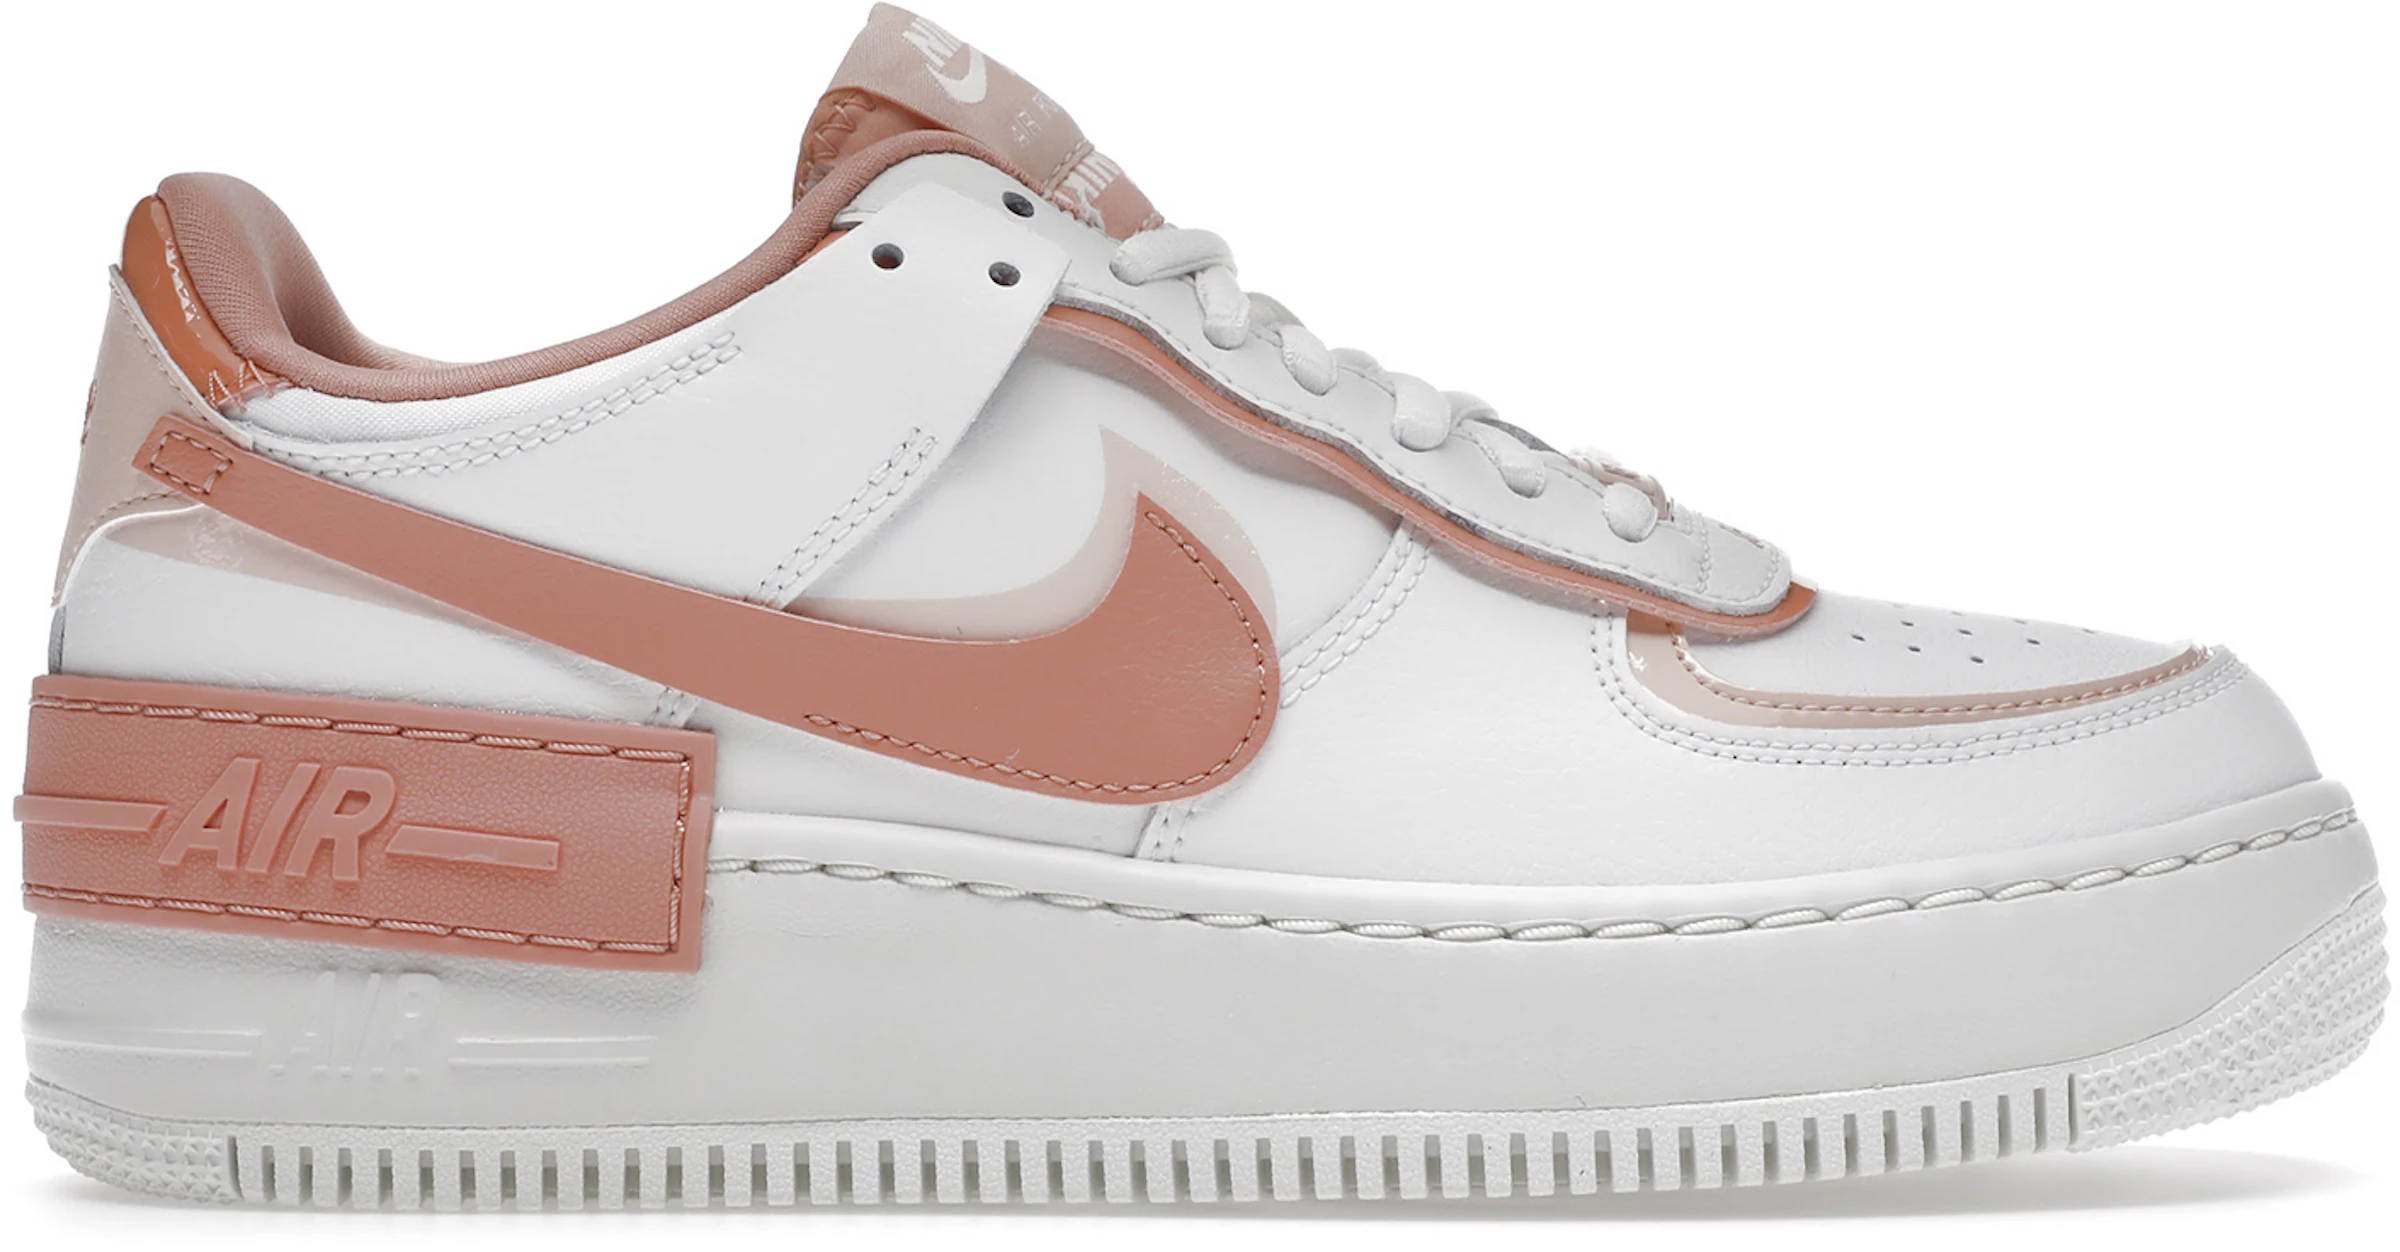 Nike Air Force Low Shadow White Coral Pink (Women's) CJ1641-101 - US